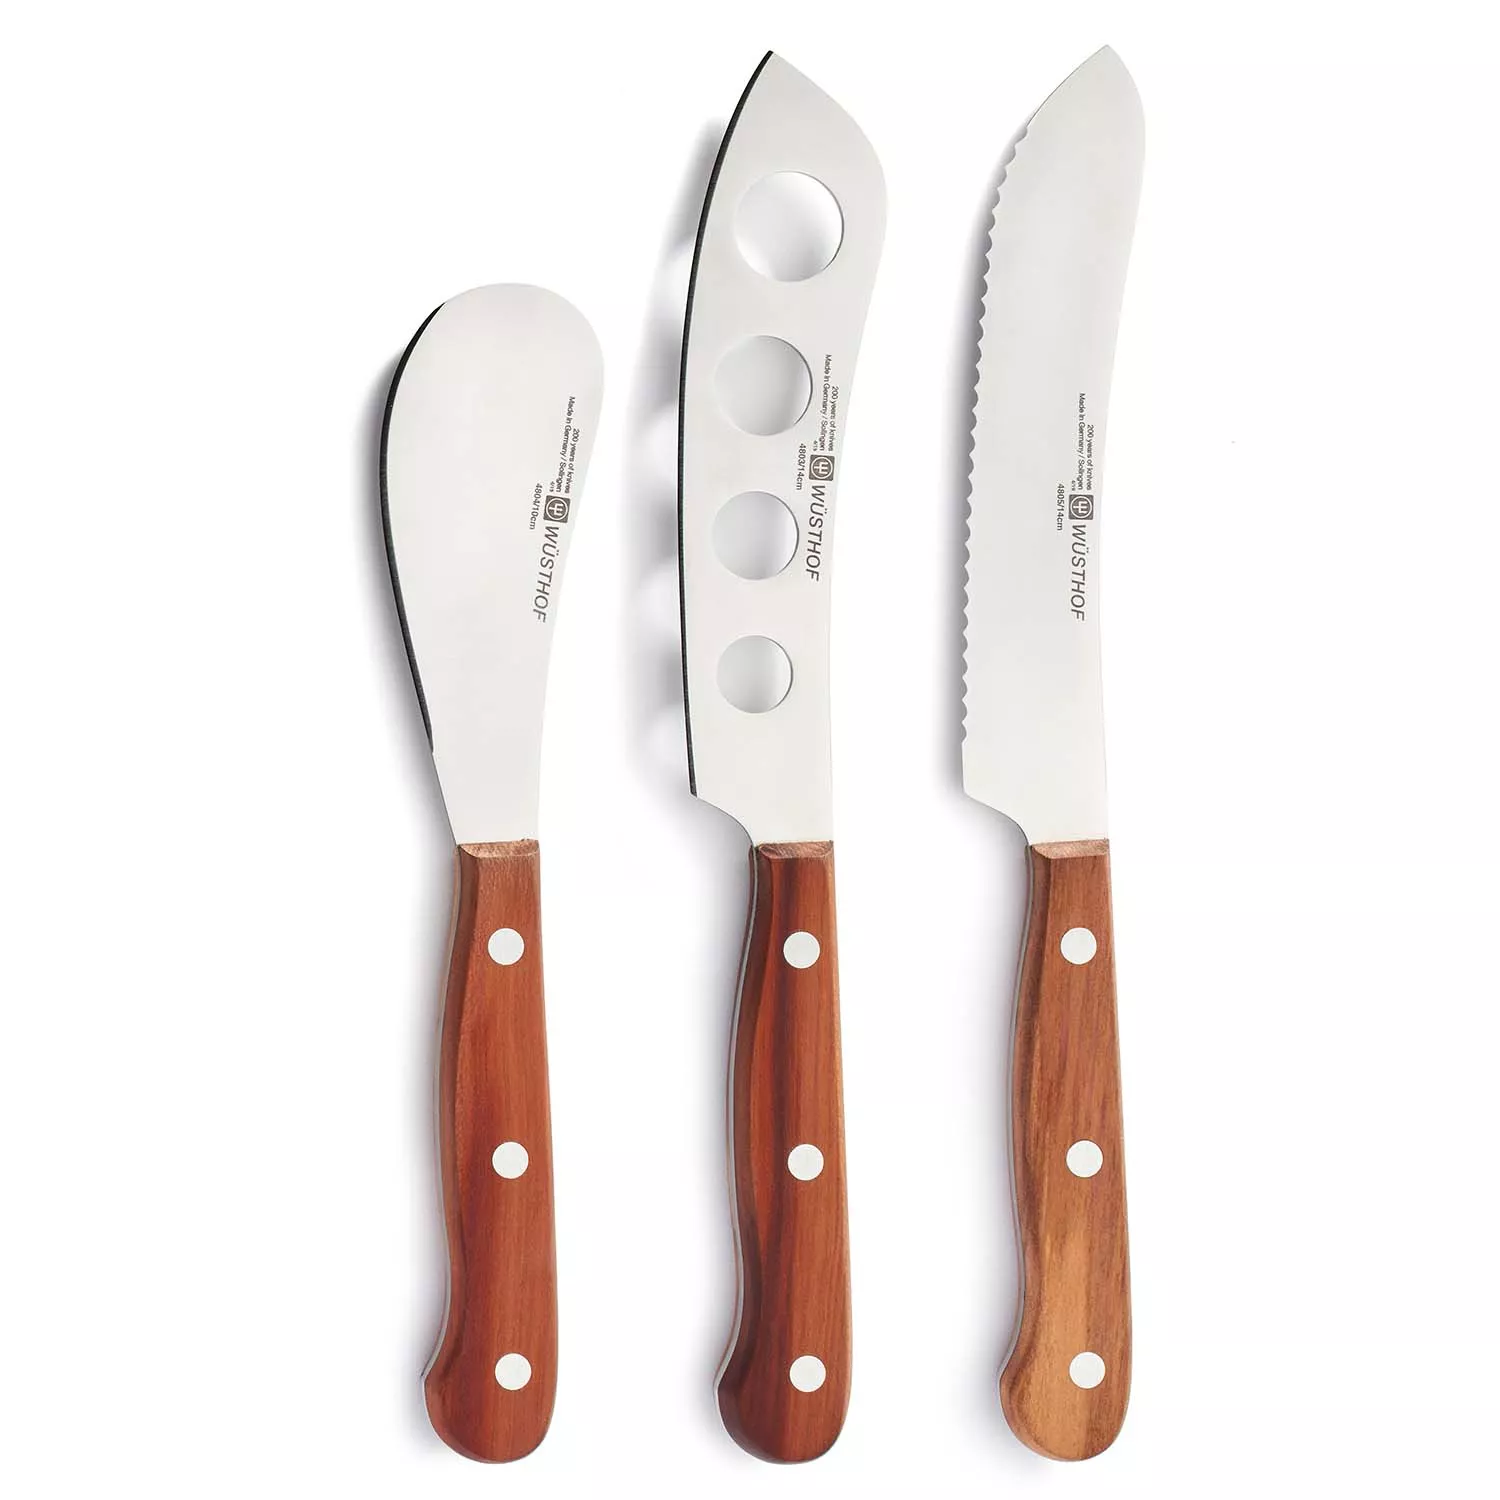 WÜSTHOF - The Three Piece Charcuterie Set offers plum wood handles and  includes a Serrated Utility Knife, Soft Cheese Knife, and Pâté Knife,  perfect for your weekend cheese board! #MyWusthof #MadeinSolingen